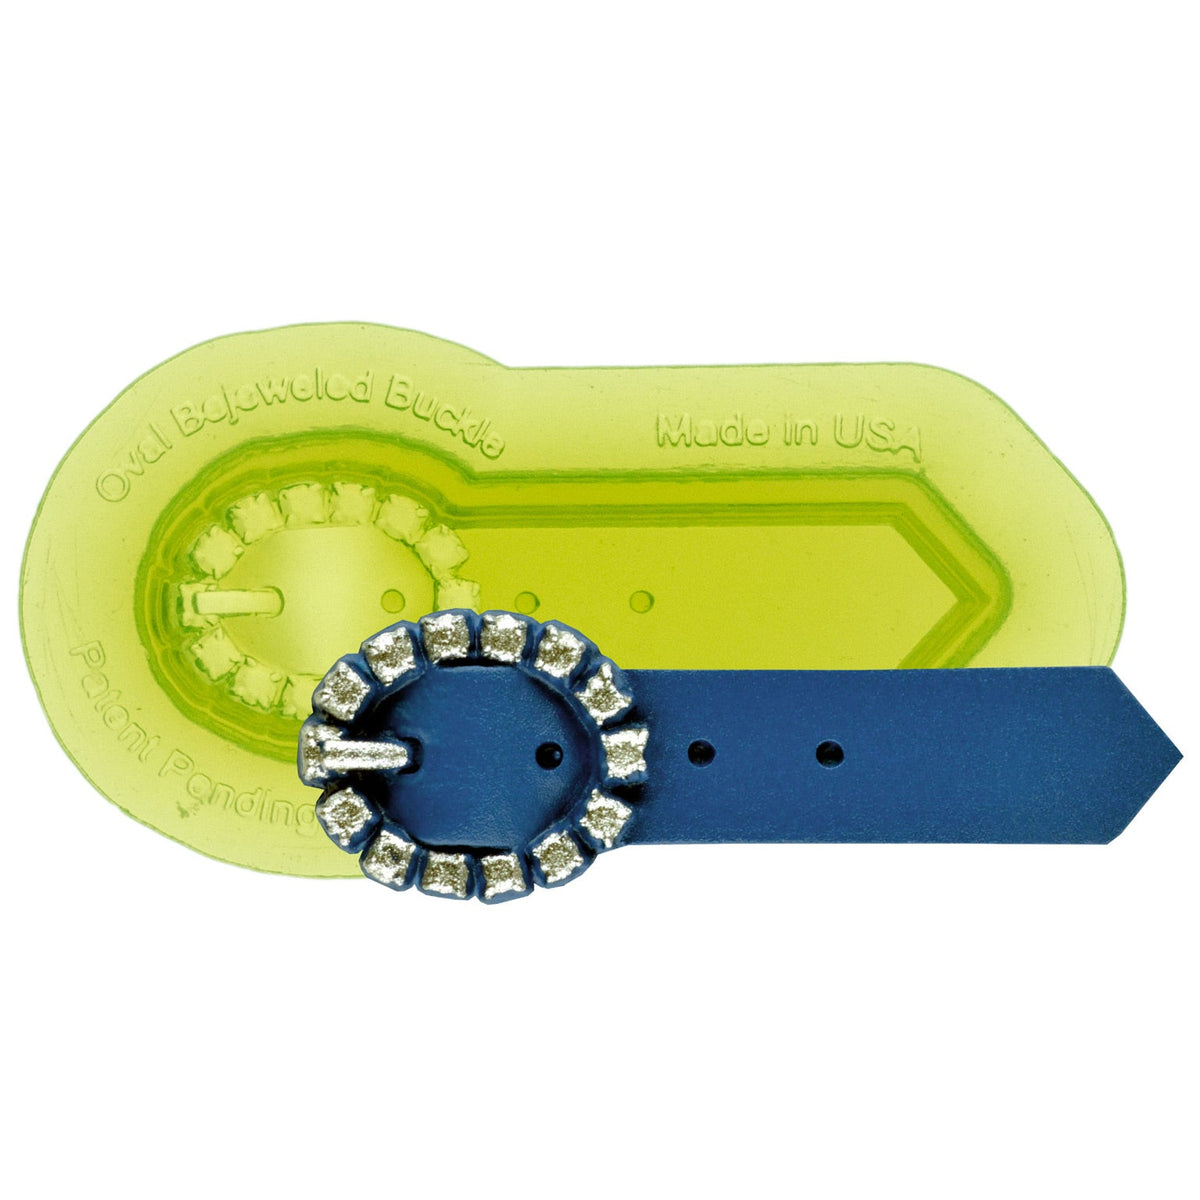 Oval Bejeweled Buckle Silicone Sprig Mold for Pottery and Ceramics by Marvelous Molds